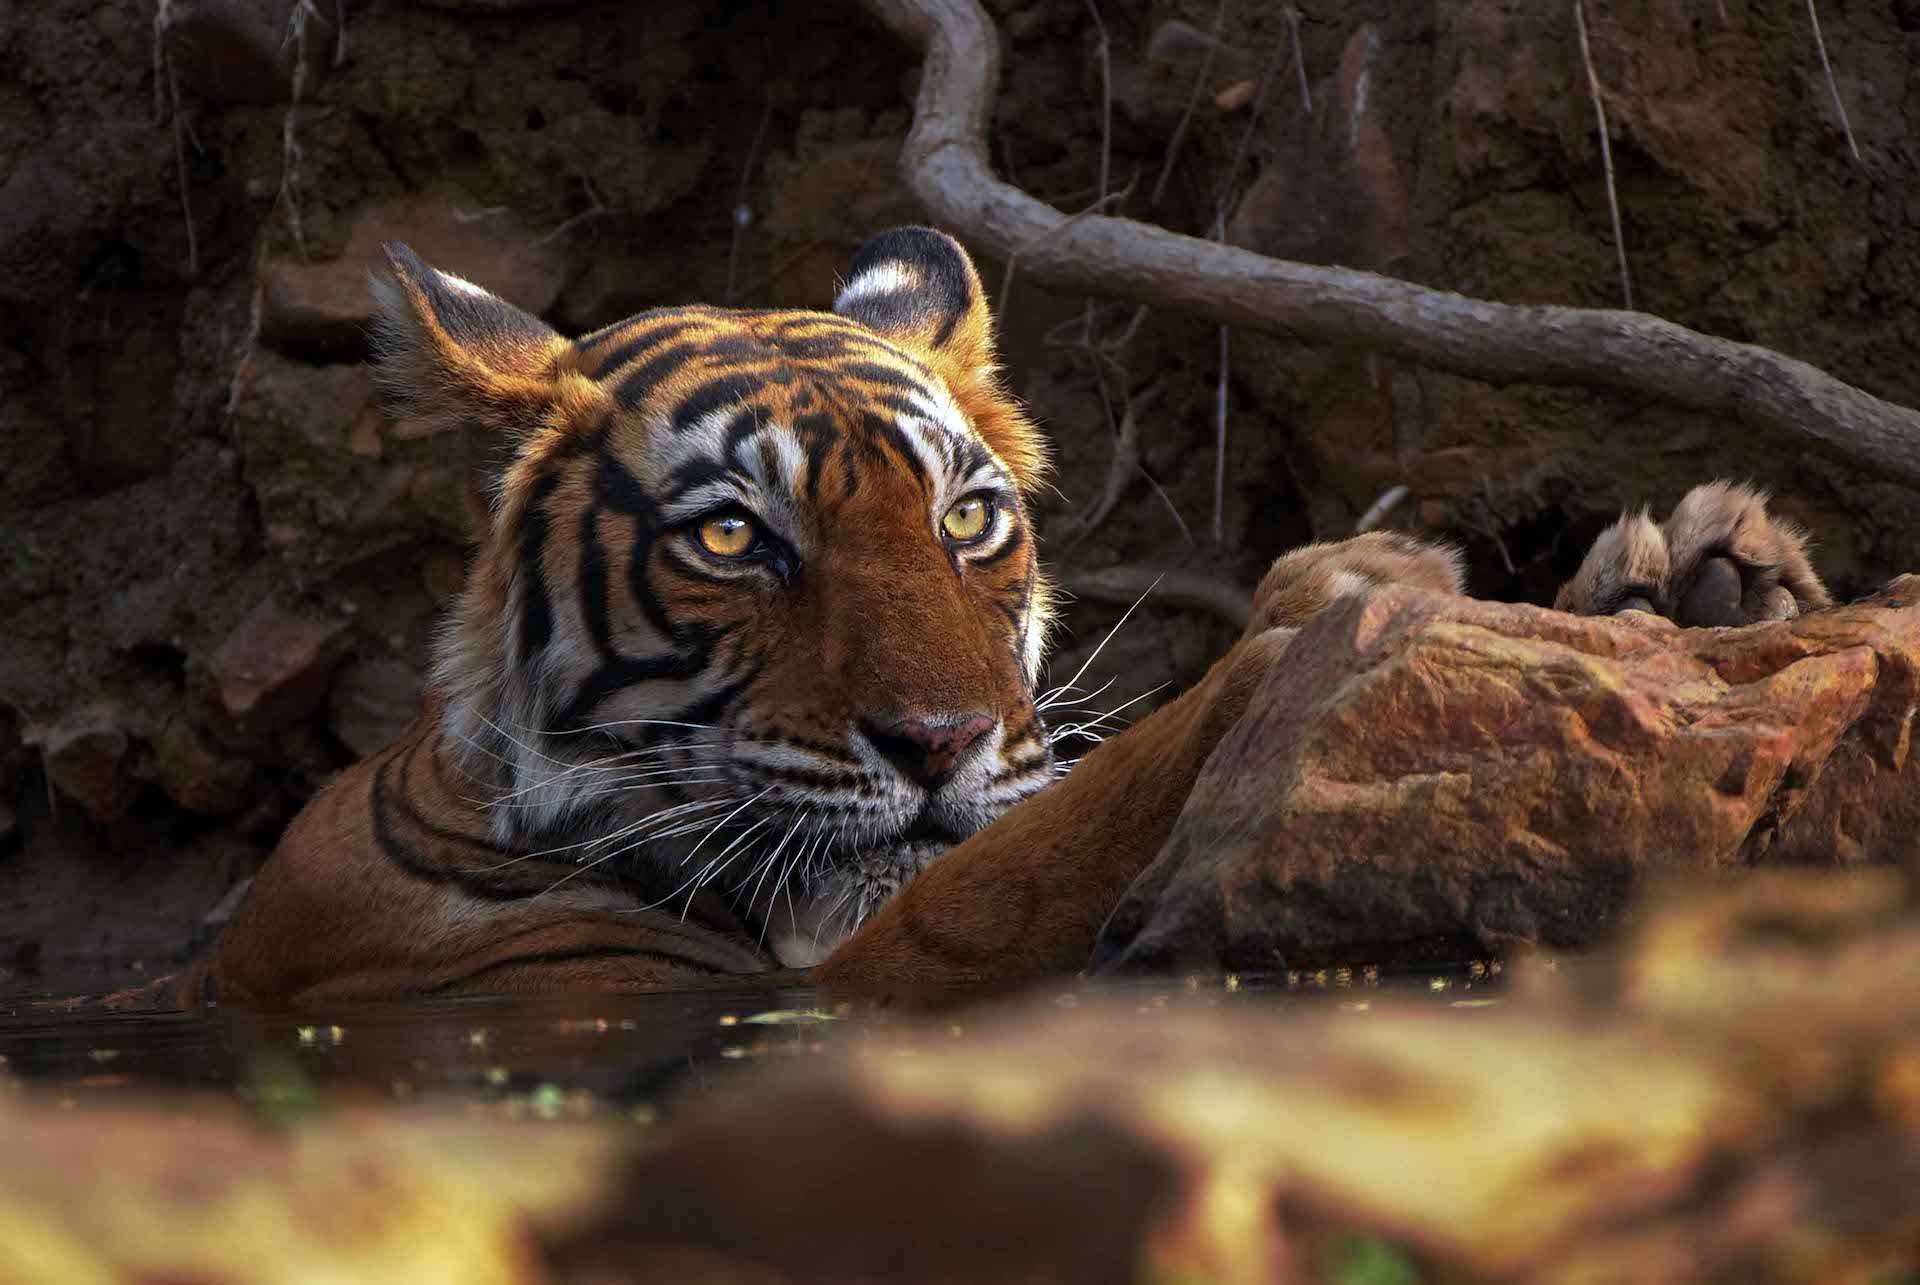 A striking photo of a tiger in India 